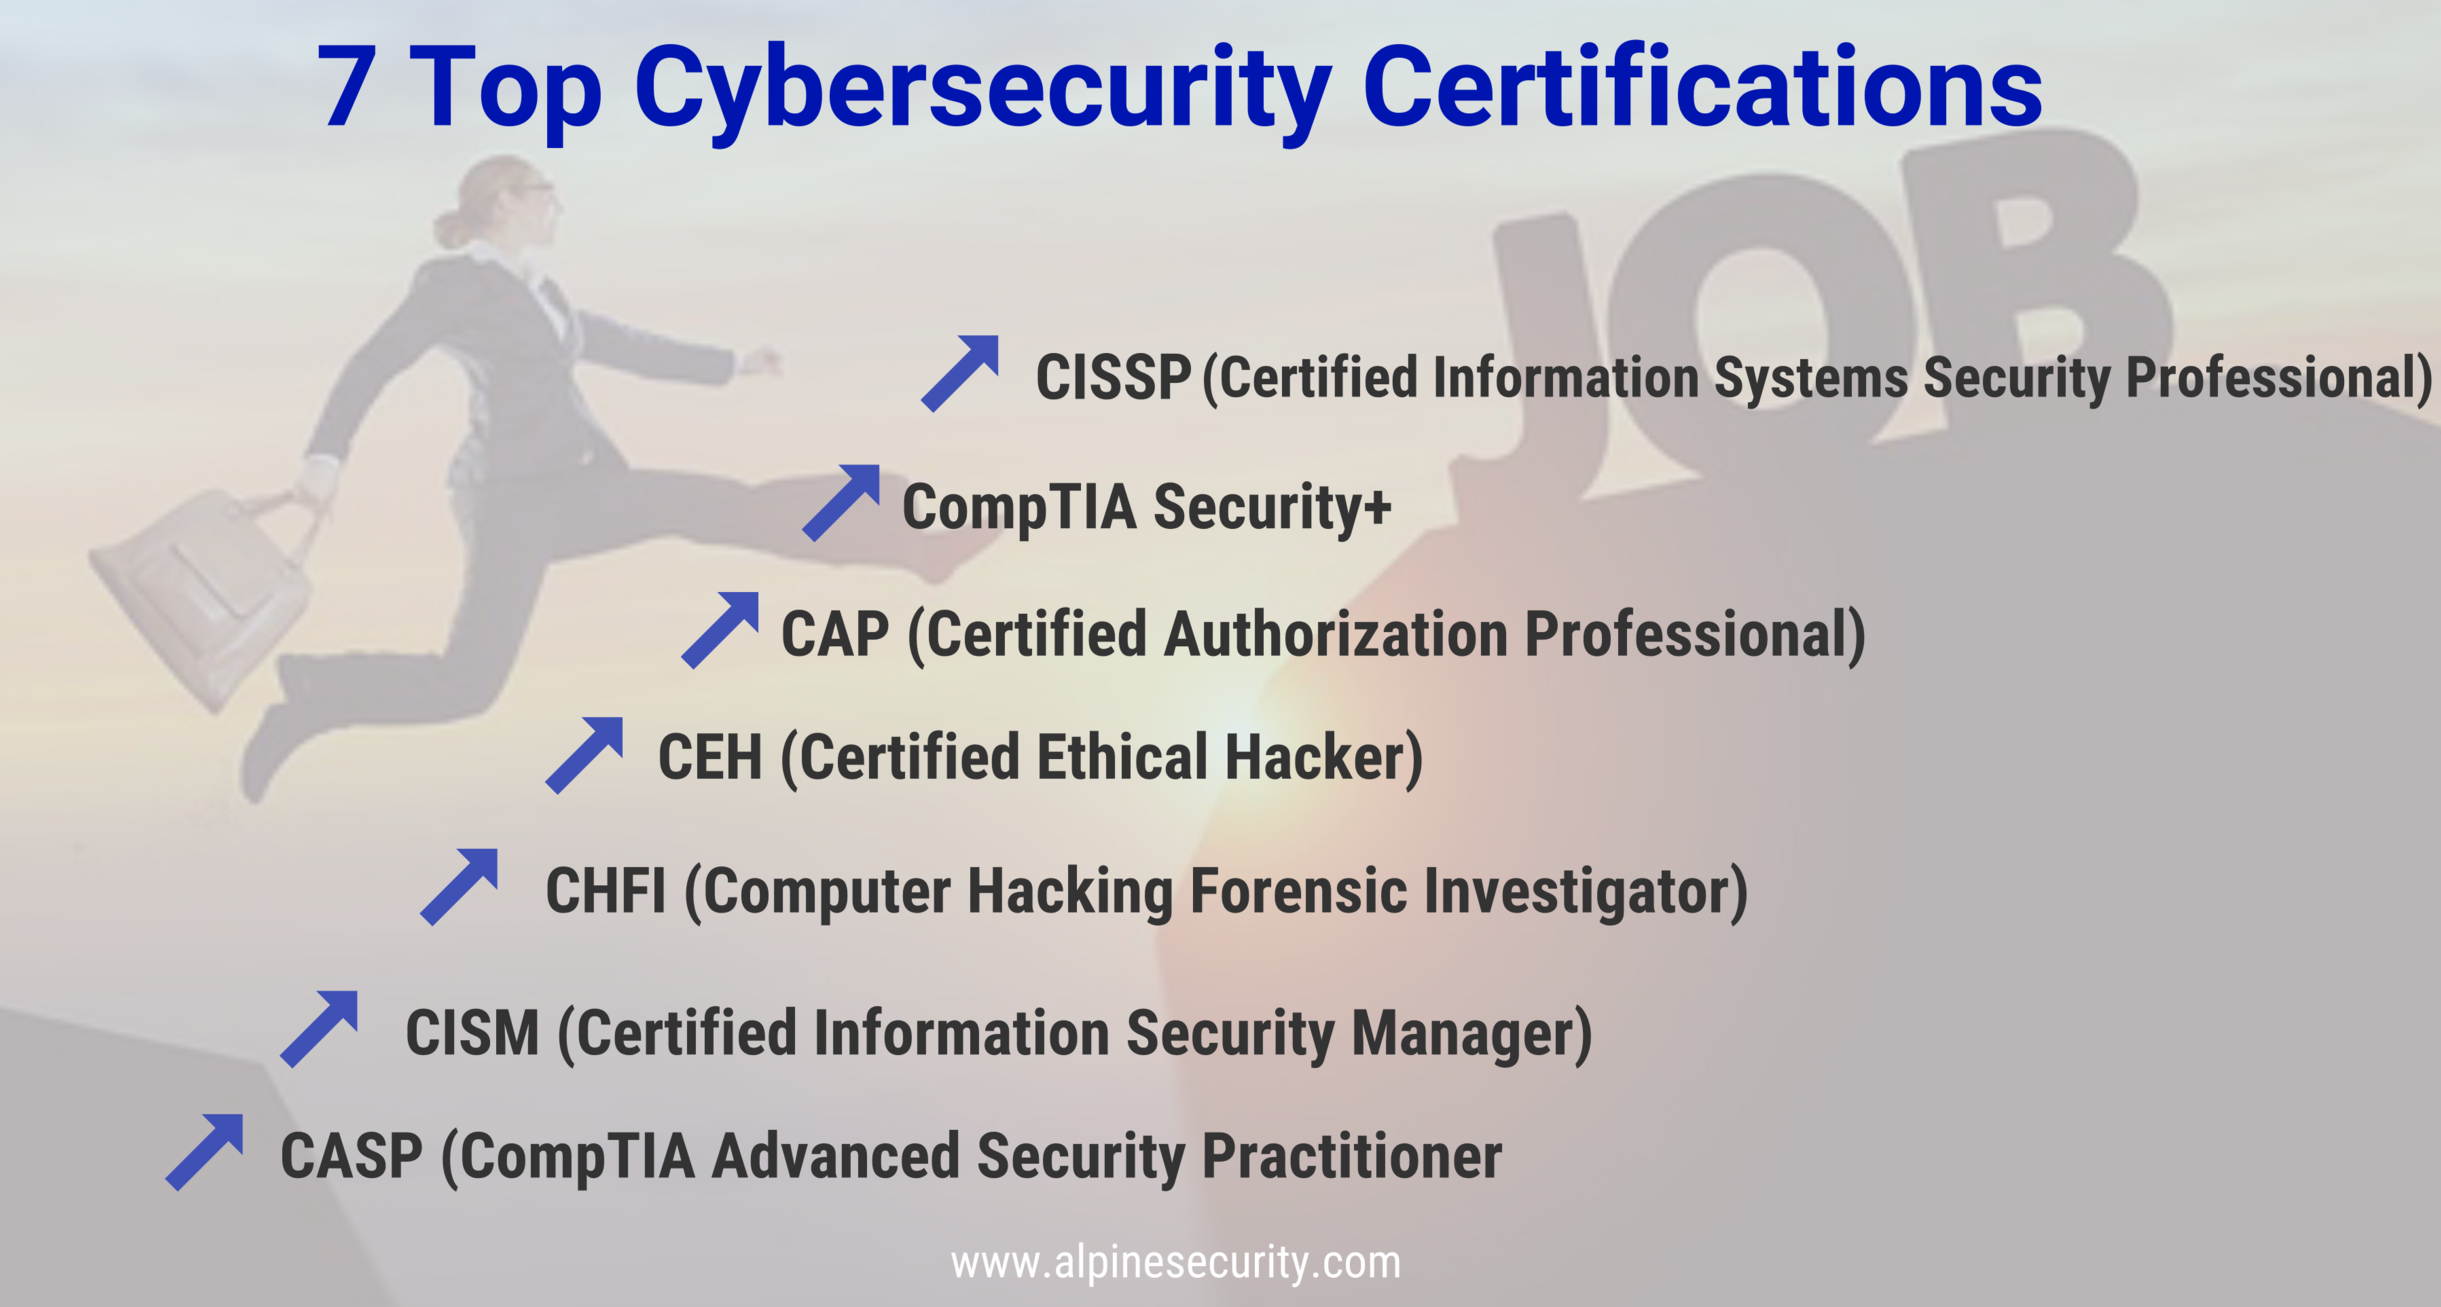 what certifications should i get for cyber security?